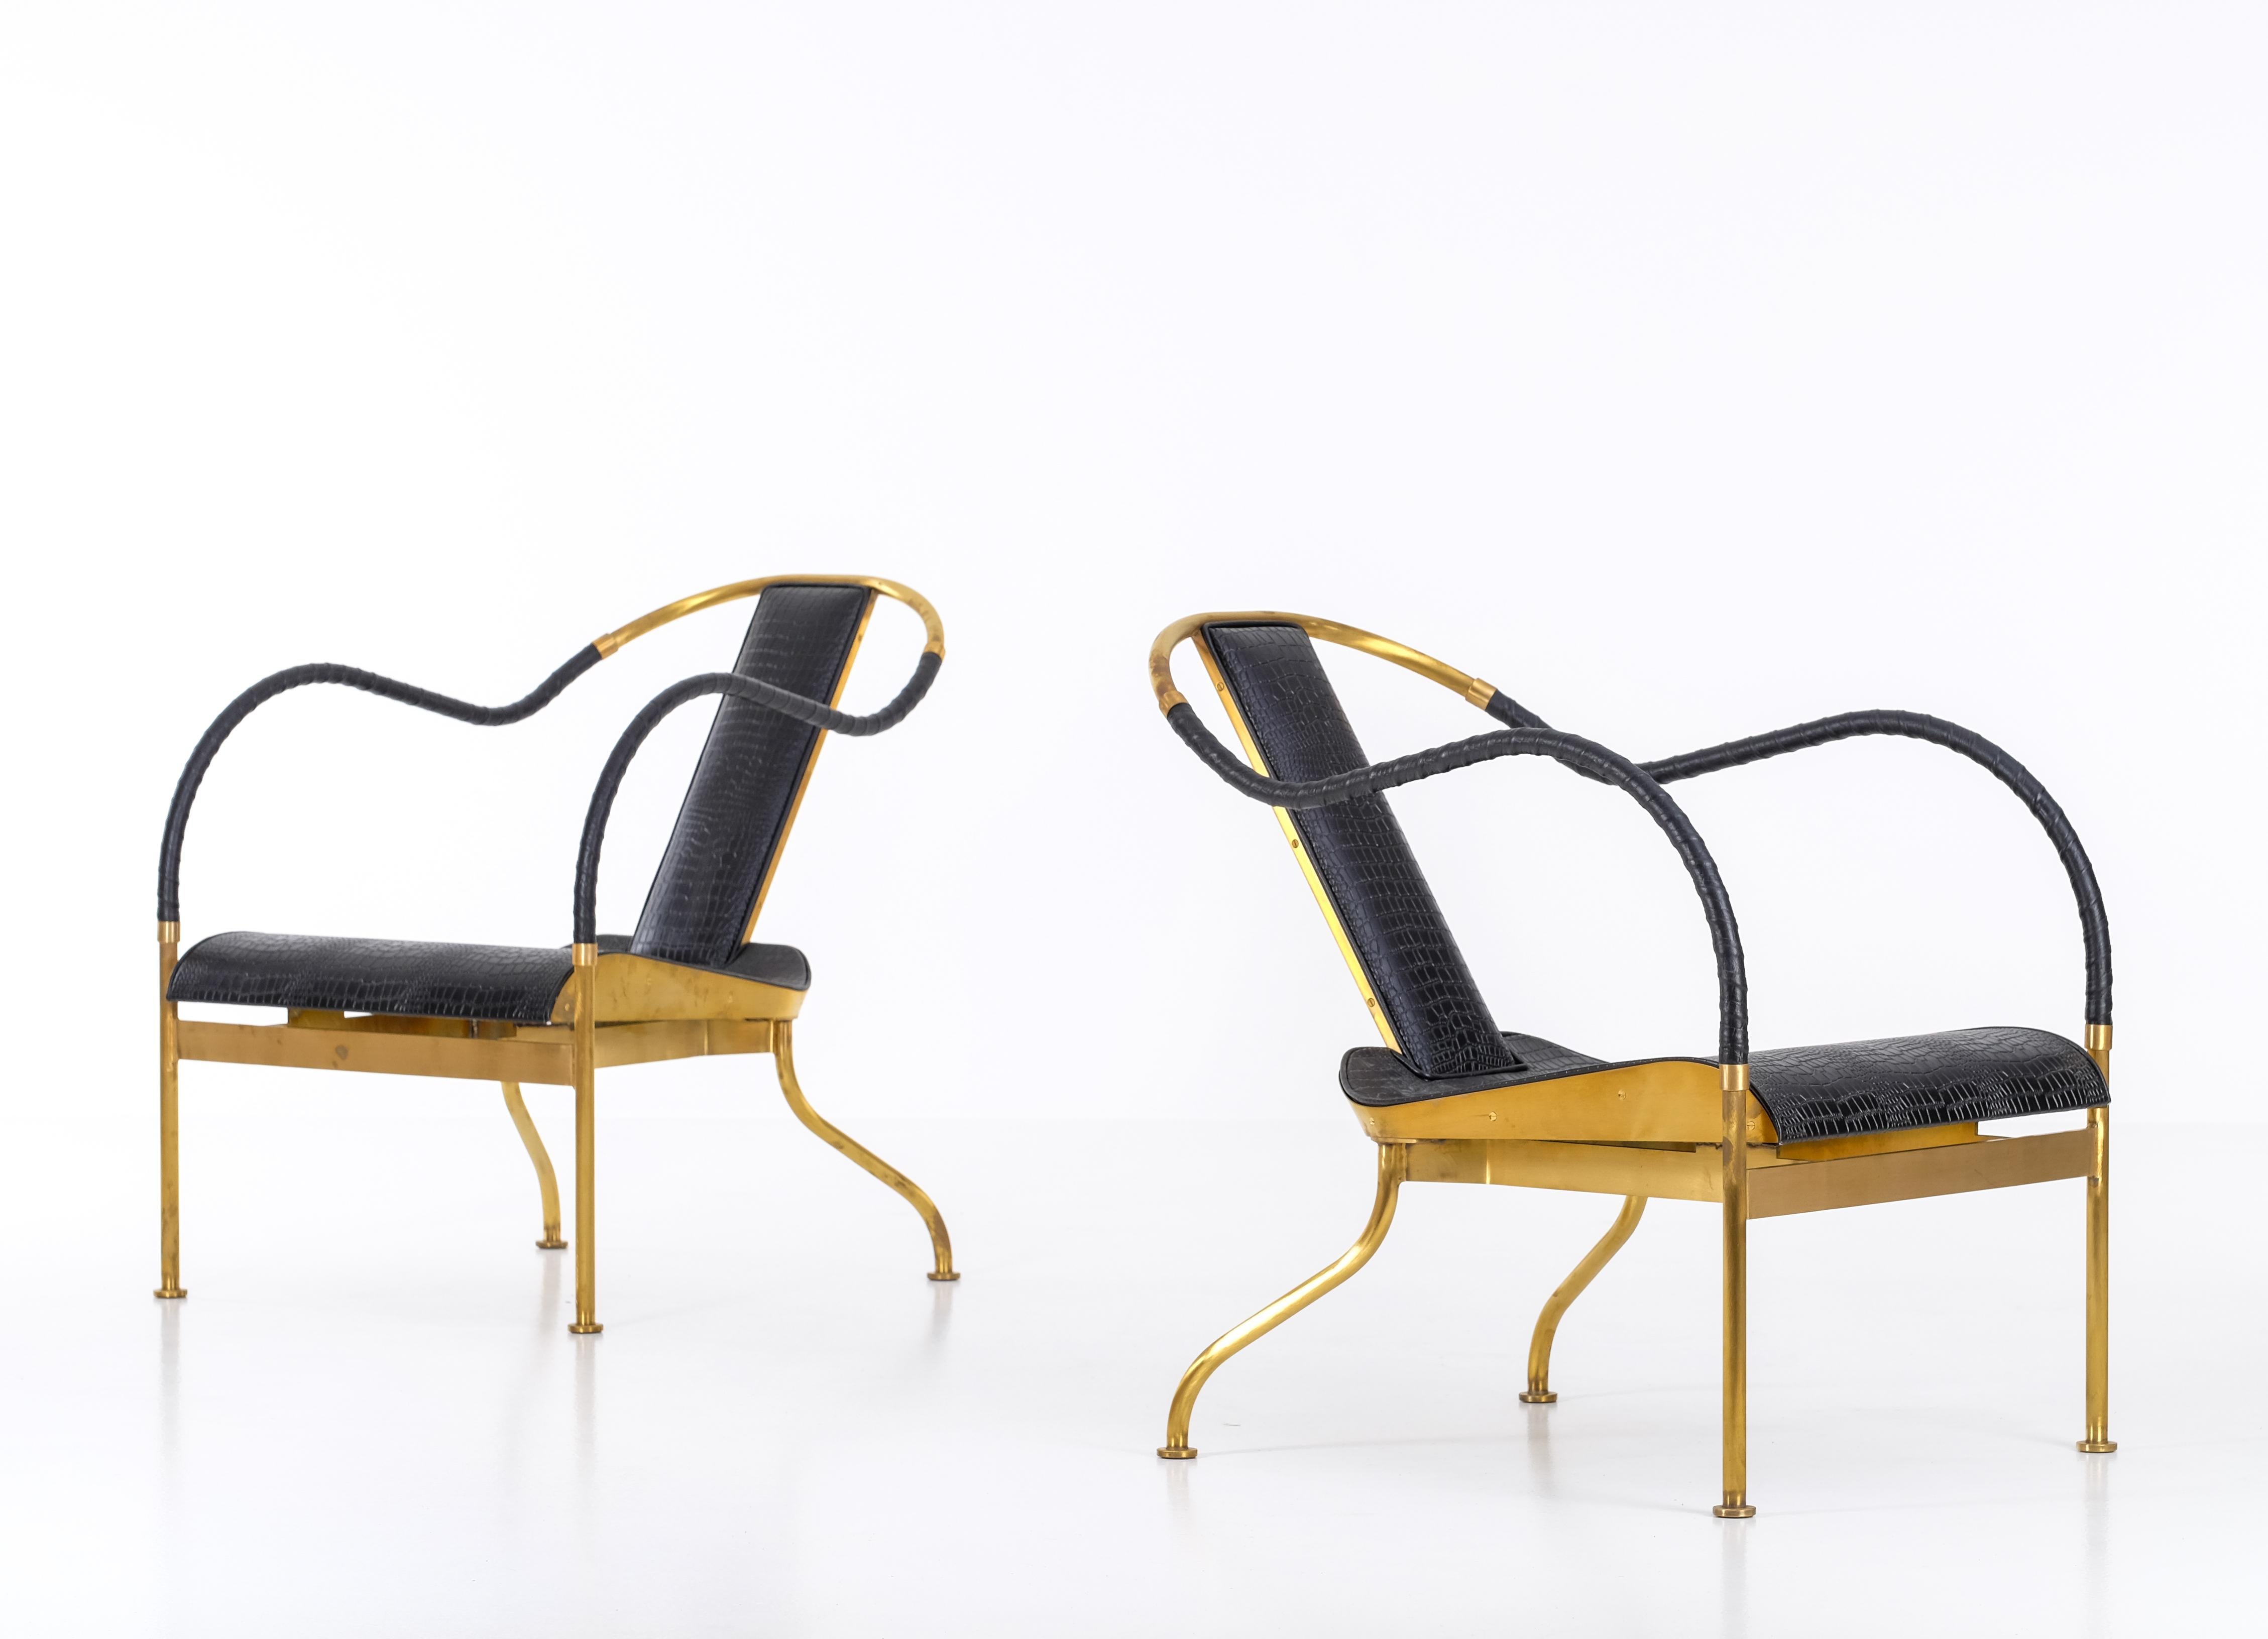 Brass frame, seat and back in crocodile patterned prime leather. Leatherclothes-wound armrests. Limited edition of 360 chairs produced in 1999. This is chair #146 and #239.
Excellent condition.